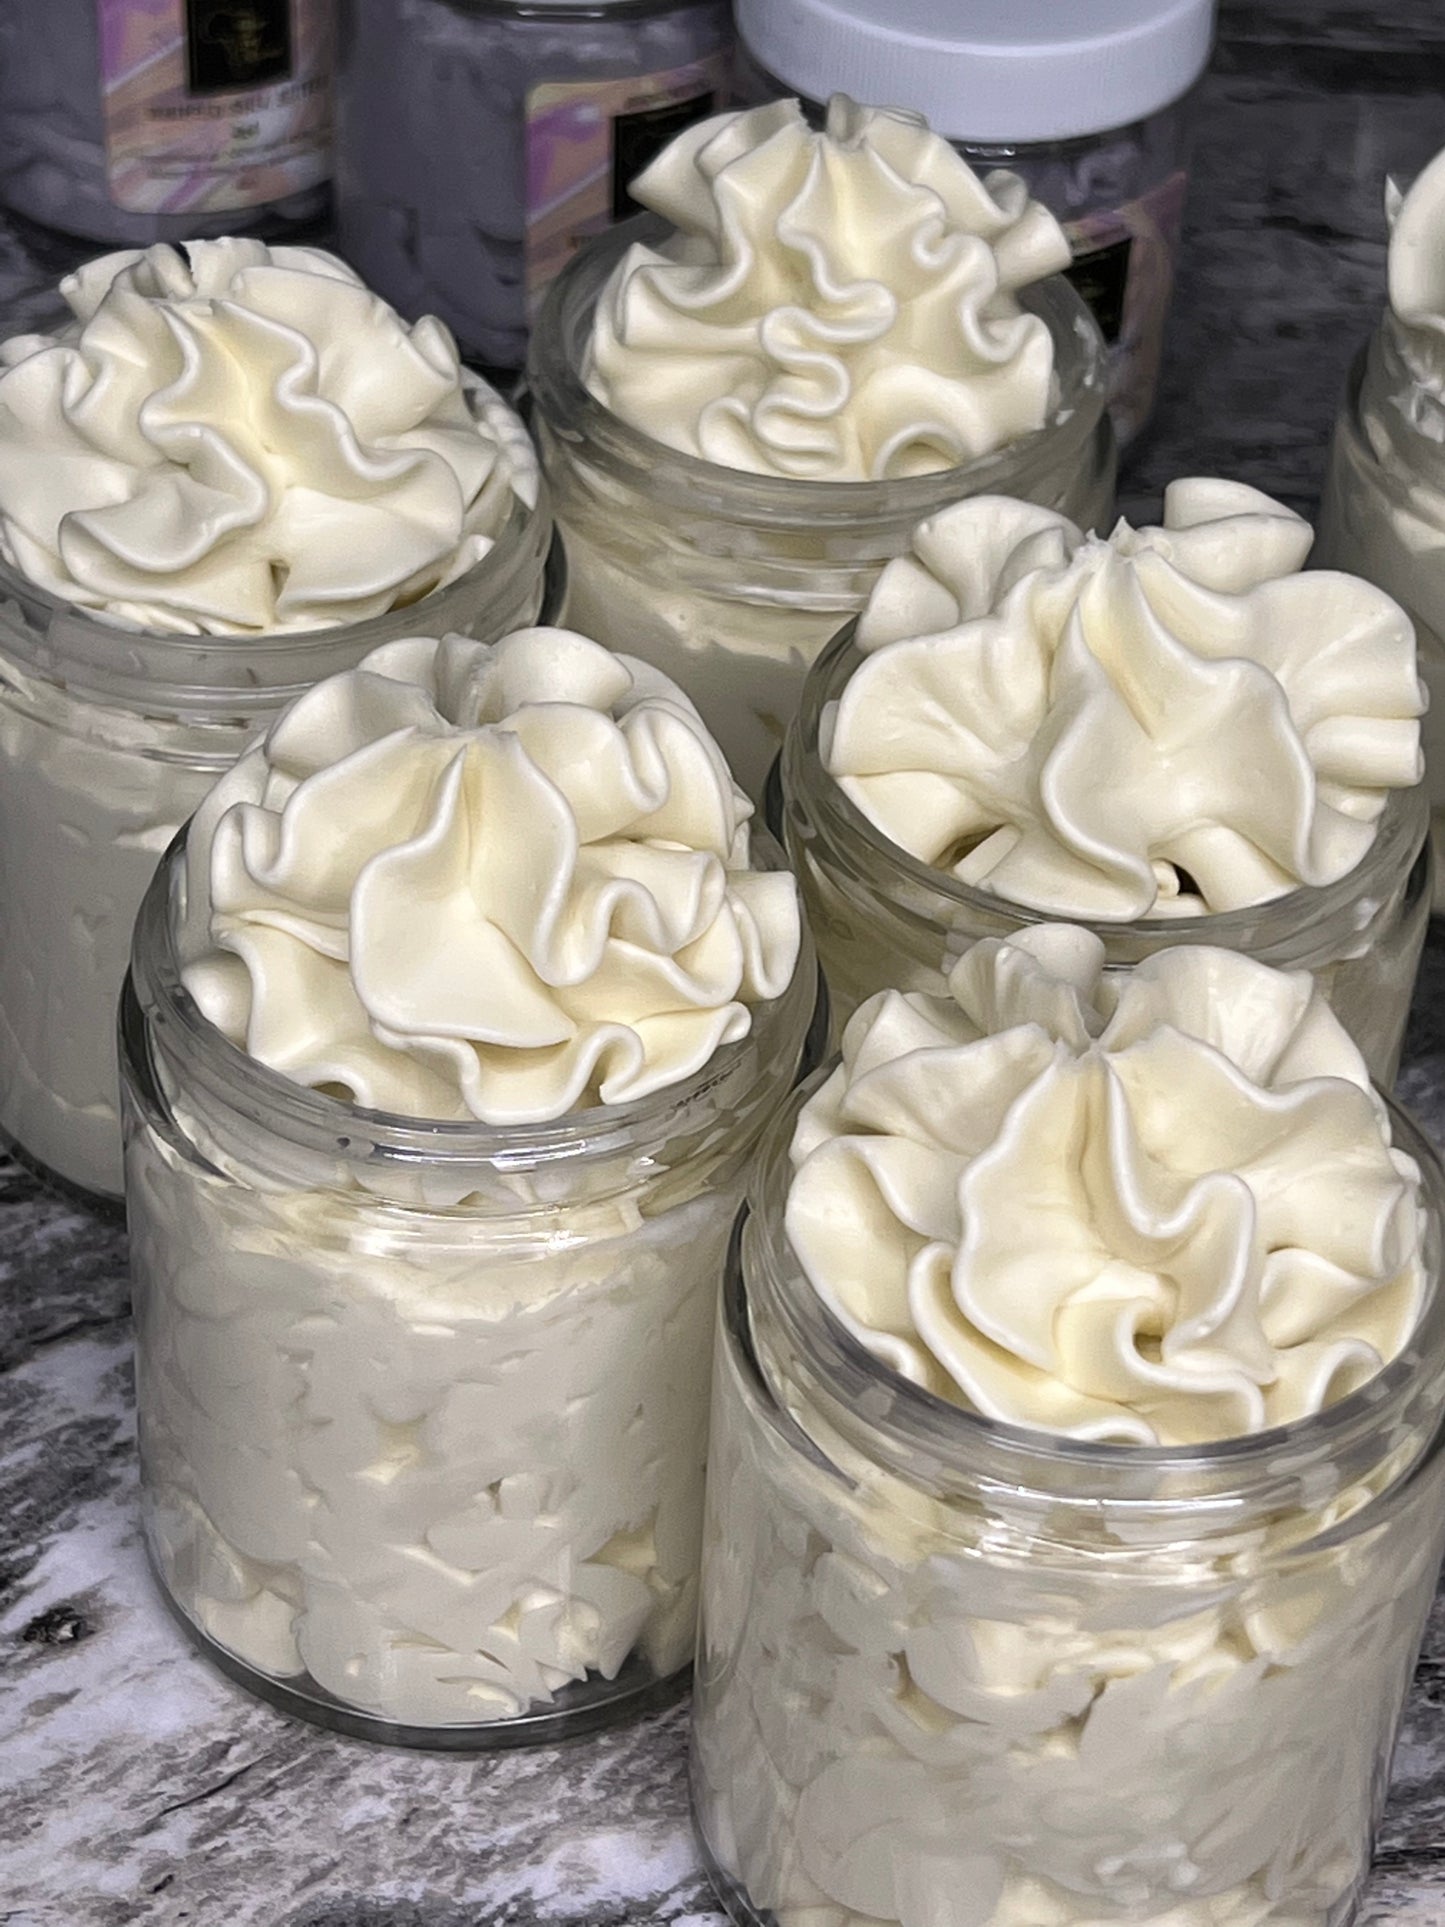 Original Unscented Whipped Shea Butter